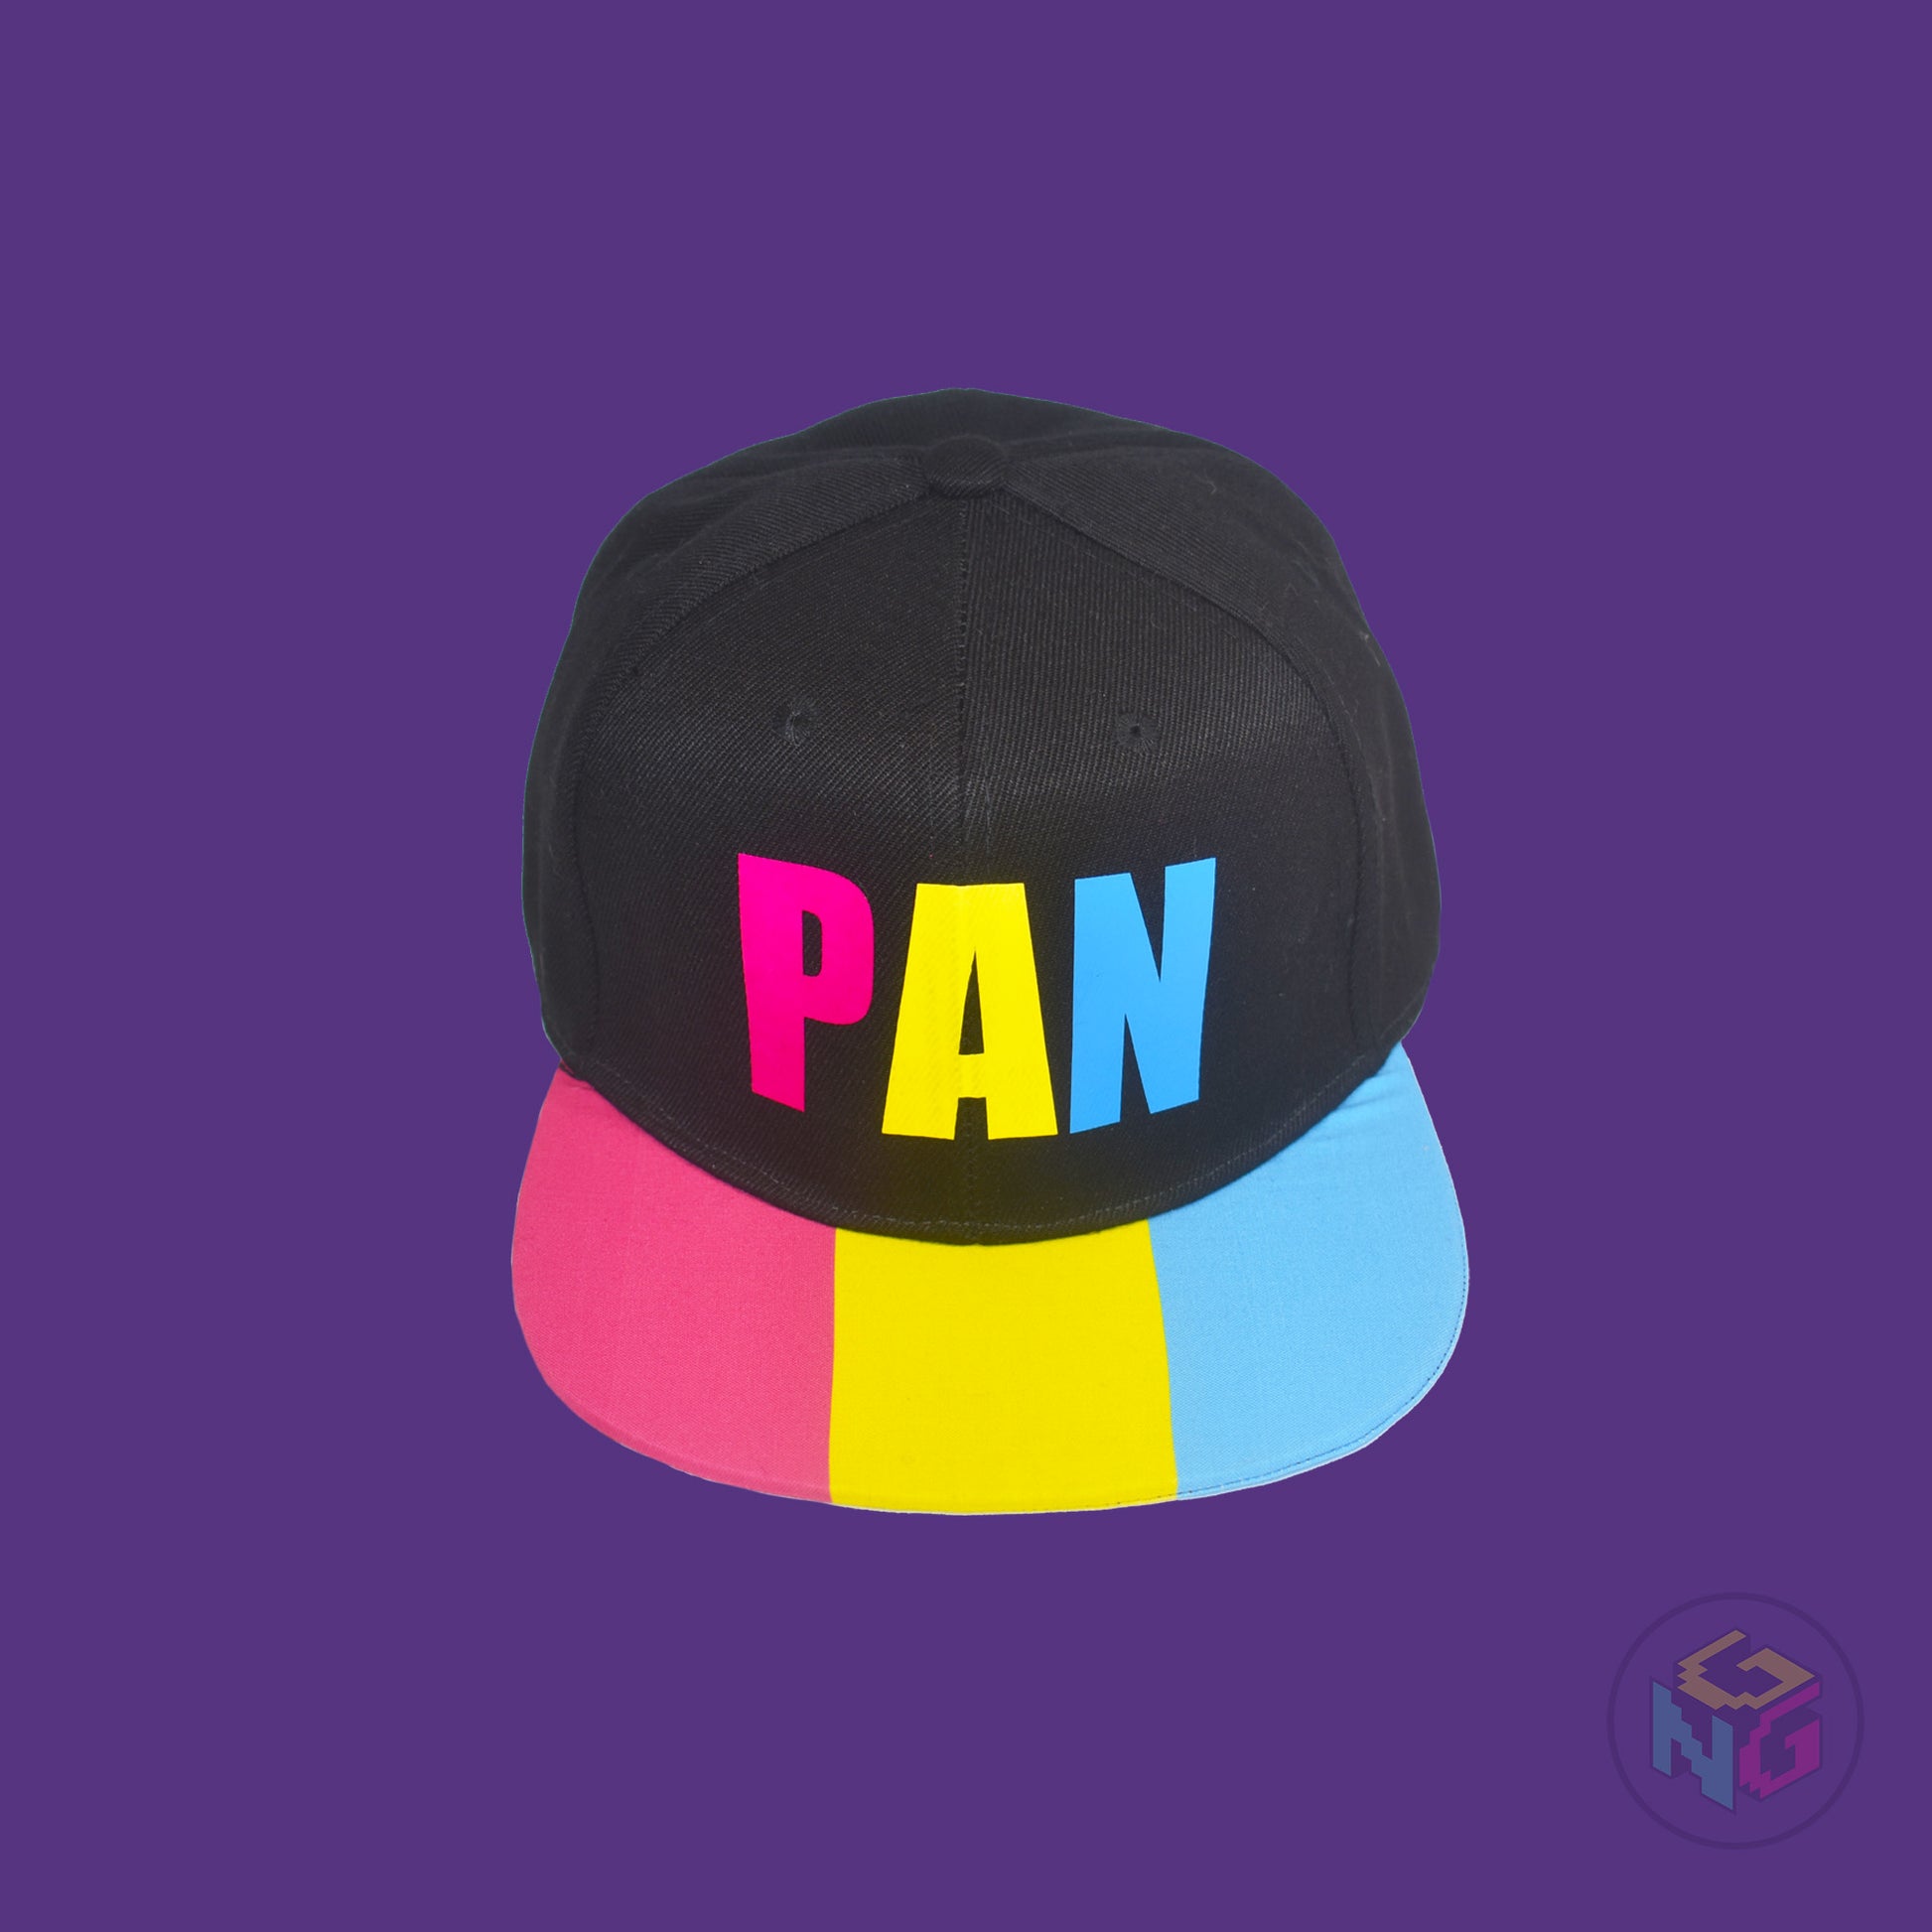 Black flat bill snapback hat. The brim has the pansexual pride flag on both sides and the front of the hat has the word “PAN” in pink, yellow, and blue letters. Front top view